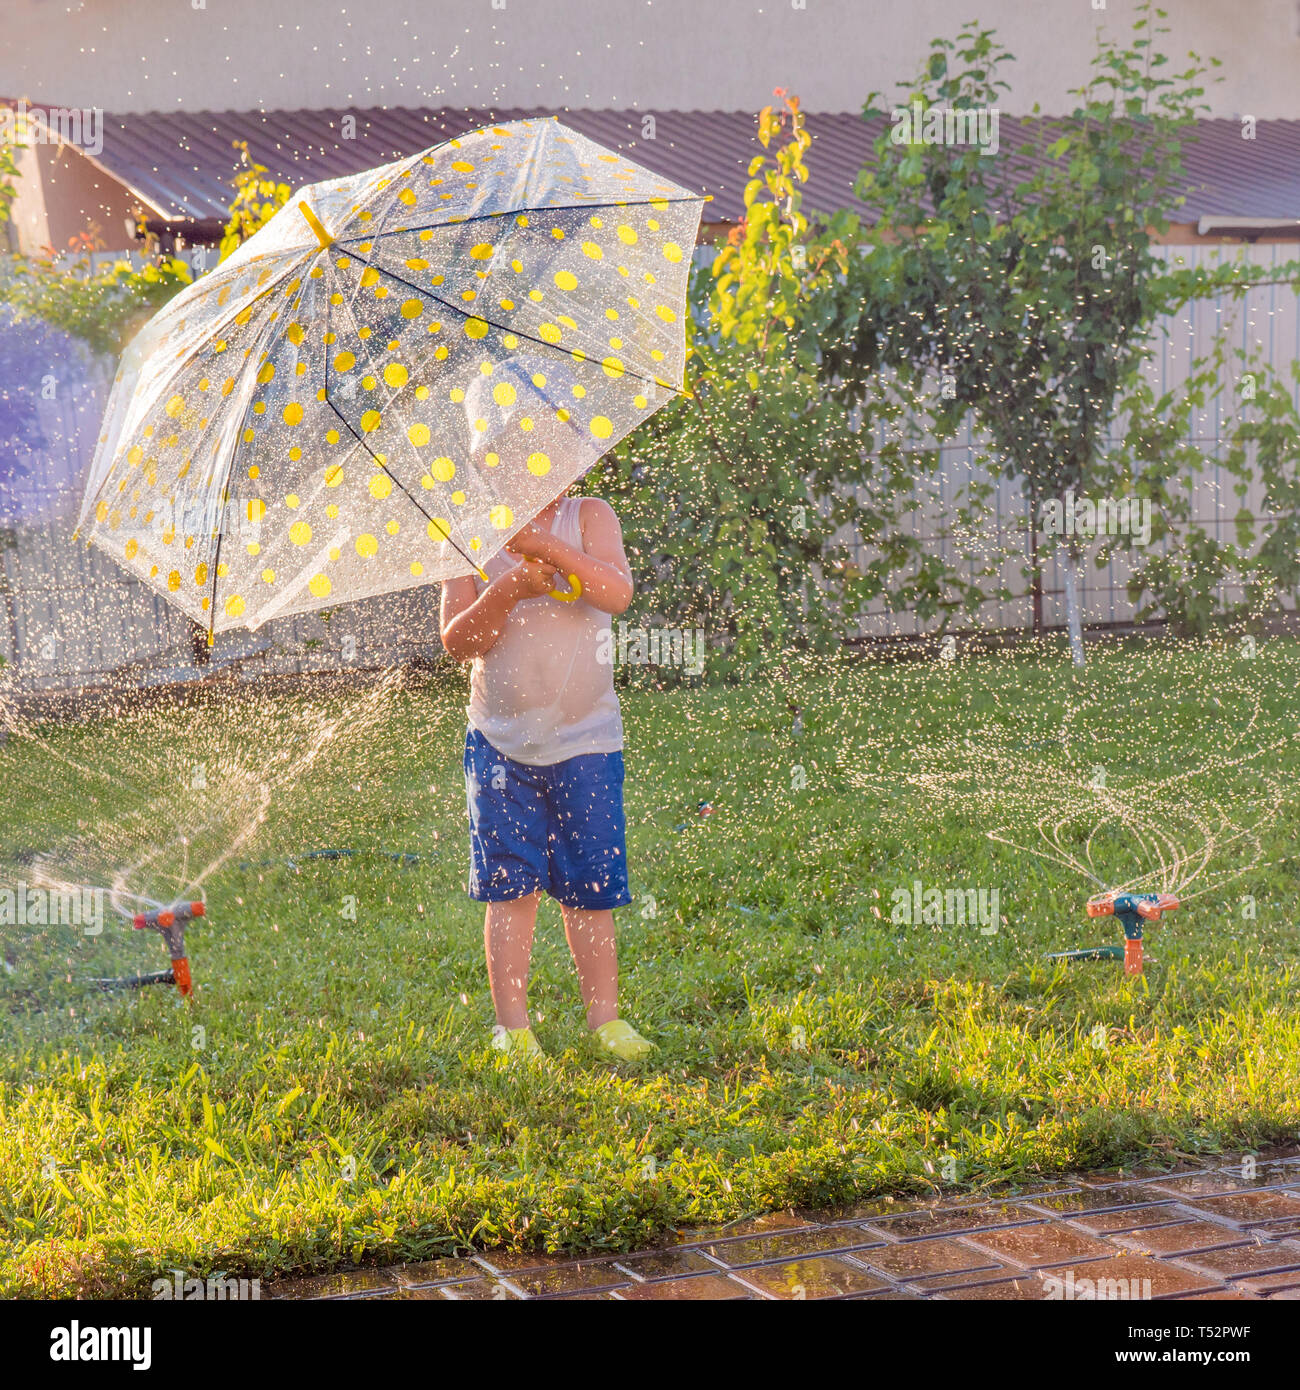 Summer outdoor activities. Children playing outdoor on front yard. Boy with umbrella having fun near automatic plant watering system. Happy childhood Stock Photo